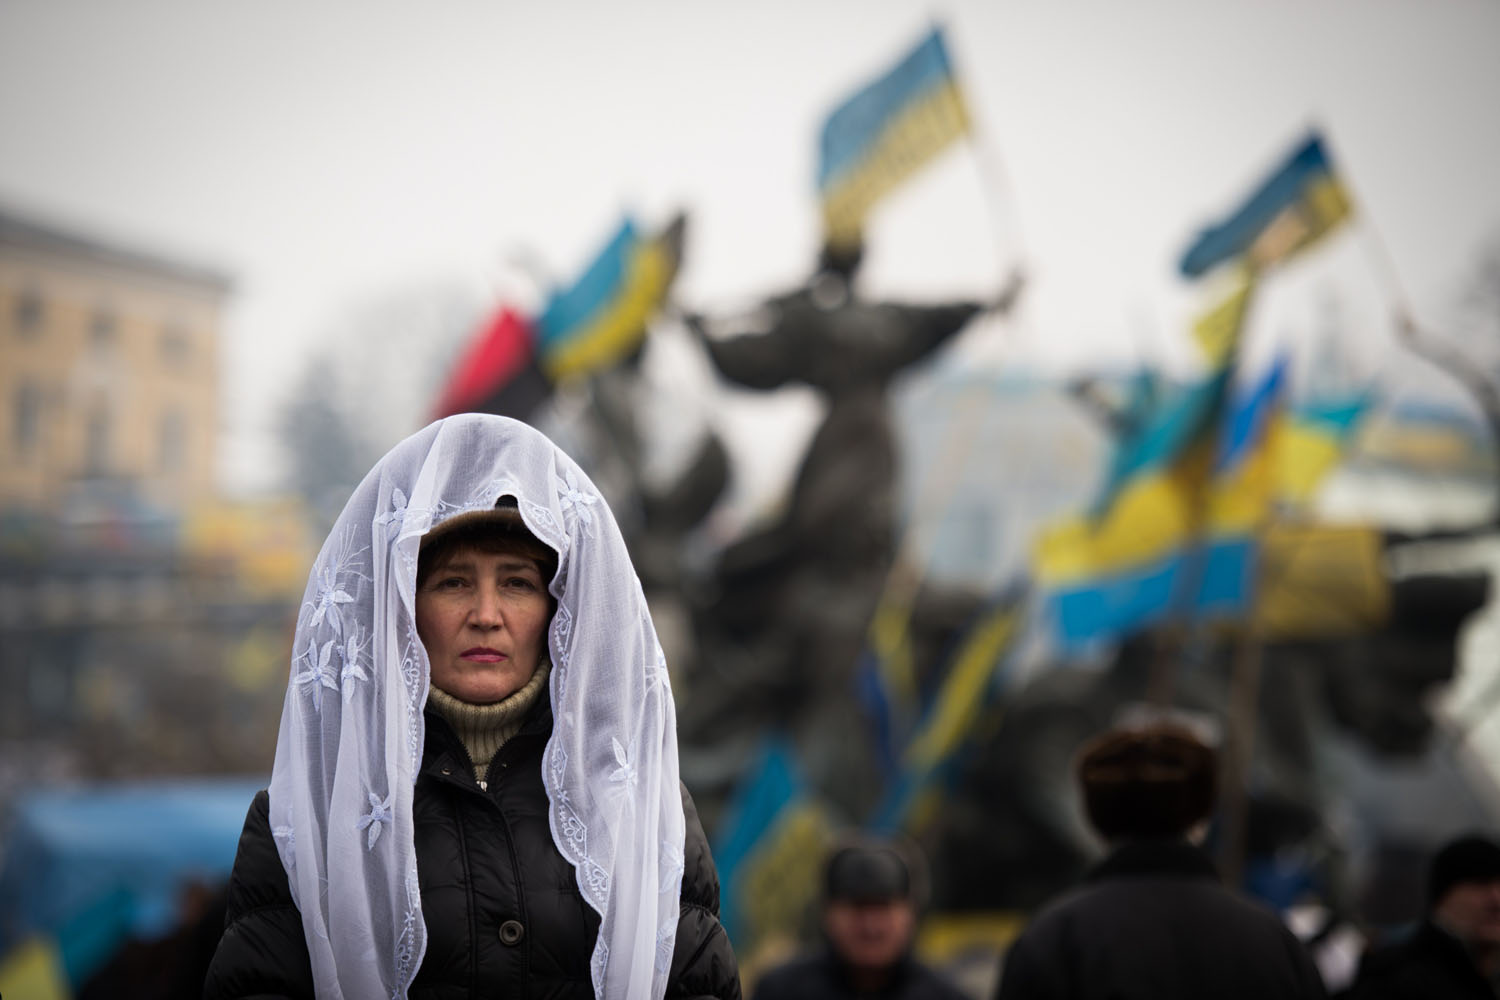 Feb. 9, 2014. A woman attends a mass rally of the opposition on Independence Square in Kiev.